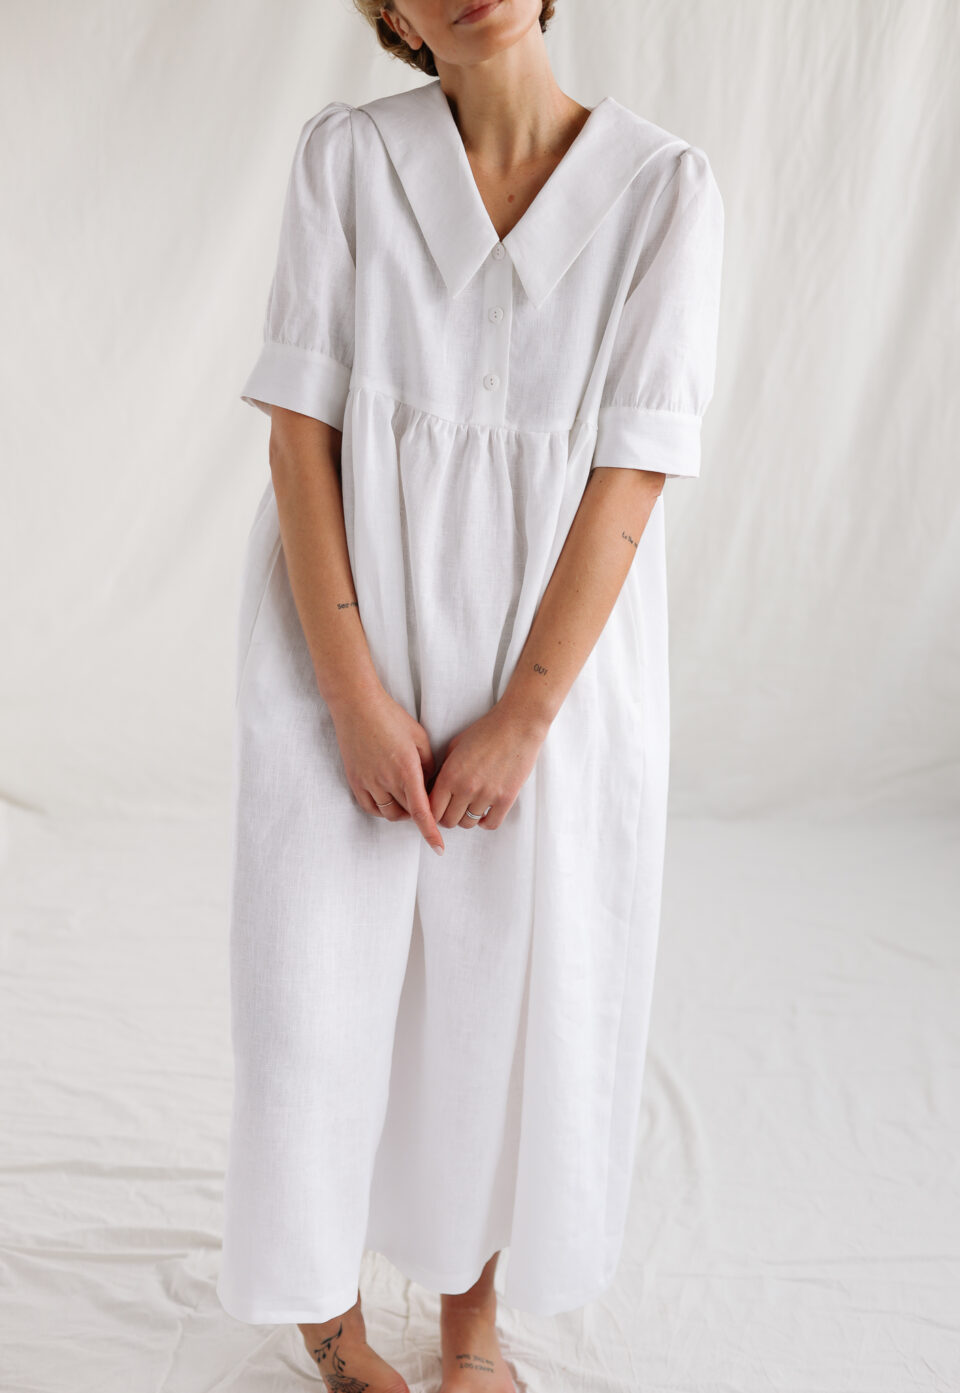 Sailor collar white linen dress AVRIL | Dress | Sustainable clothing | OffOn clothing